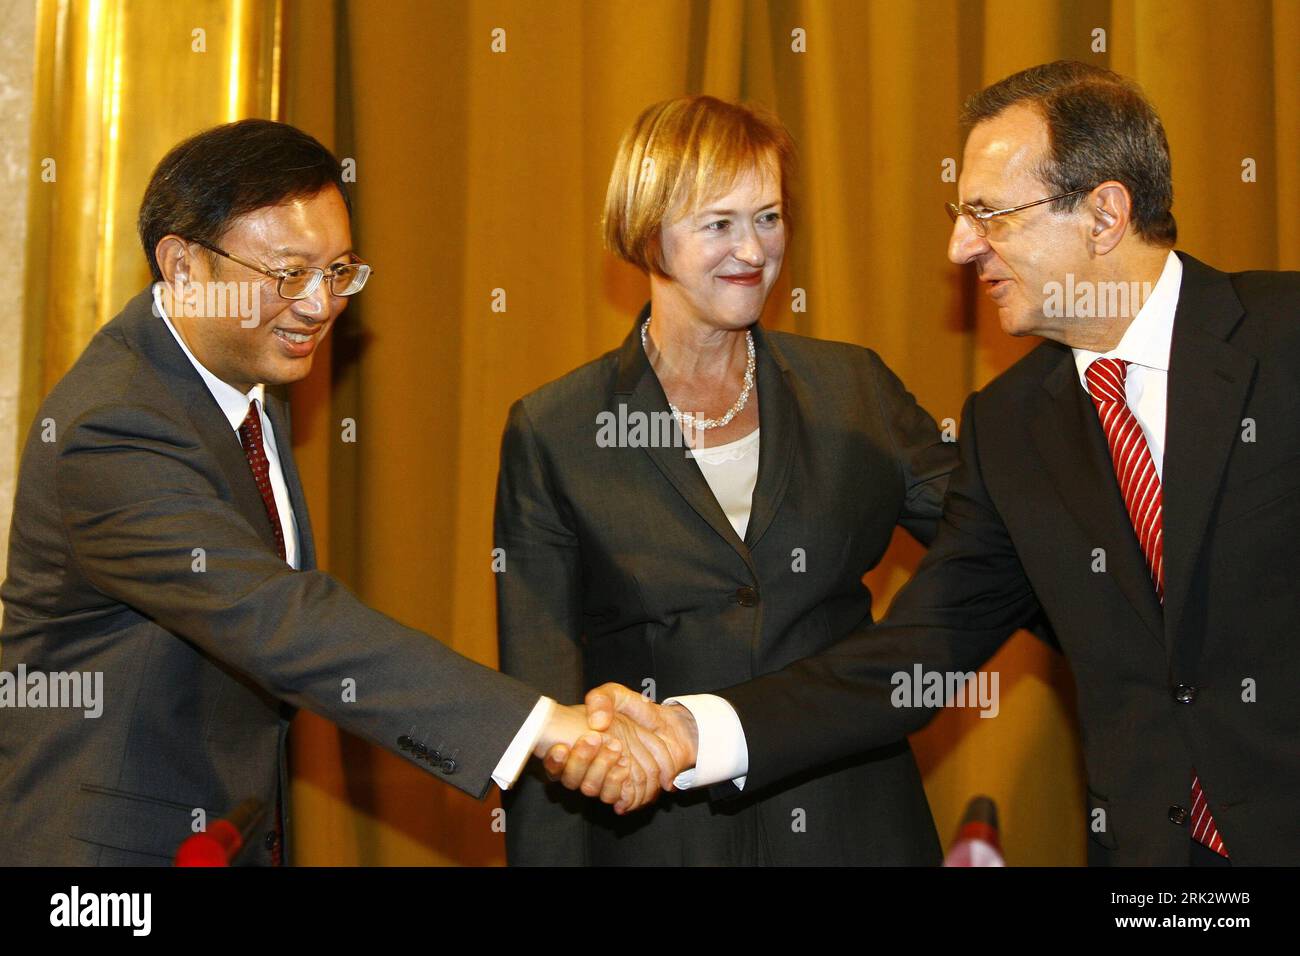 Bildnummer: 53258059  Datum: 12.08.2009  Copyright: imago/Xinhua (090812) -- GENEVA, Aug. 12, 2009 (Xinhua) -- Chinese Foreign Minister Yang Jiechi (L1) shakes hands with Sergi Ordzhonikidze, director-general of the United Nations Office in Geneva and secretary-general of the Conference on Disarmament, before he attends a meeting of the 65-nation Conference on Disarmament, in Geneva Aug. 12, 2009. Yang Jiechi on Wednesday delivered a speech at the meeting, calling on the international community to make  all-round and sound progress  in multilateral arms control and disarmament. (Xinhua/Zhang Y Stock Photo